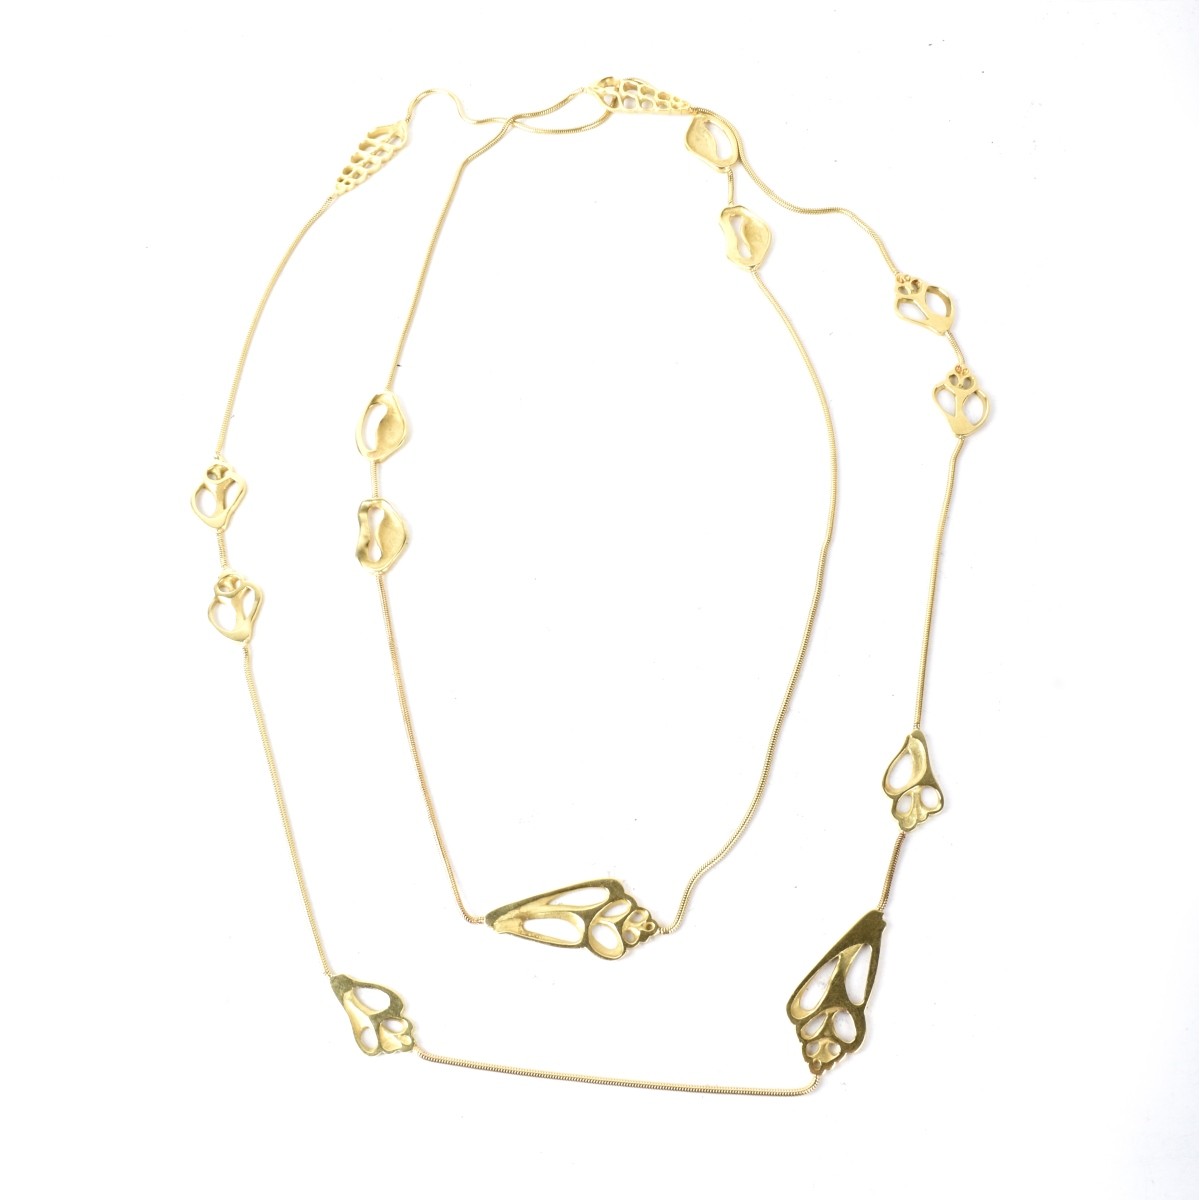 A. Cummings for Tiffany & Co 18K Necklace